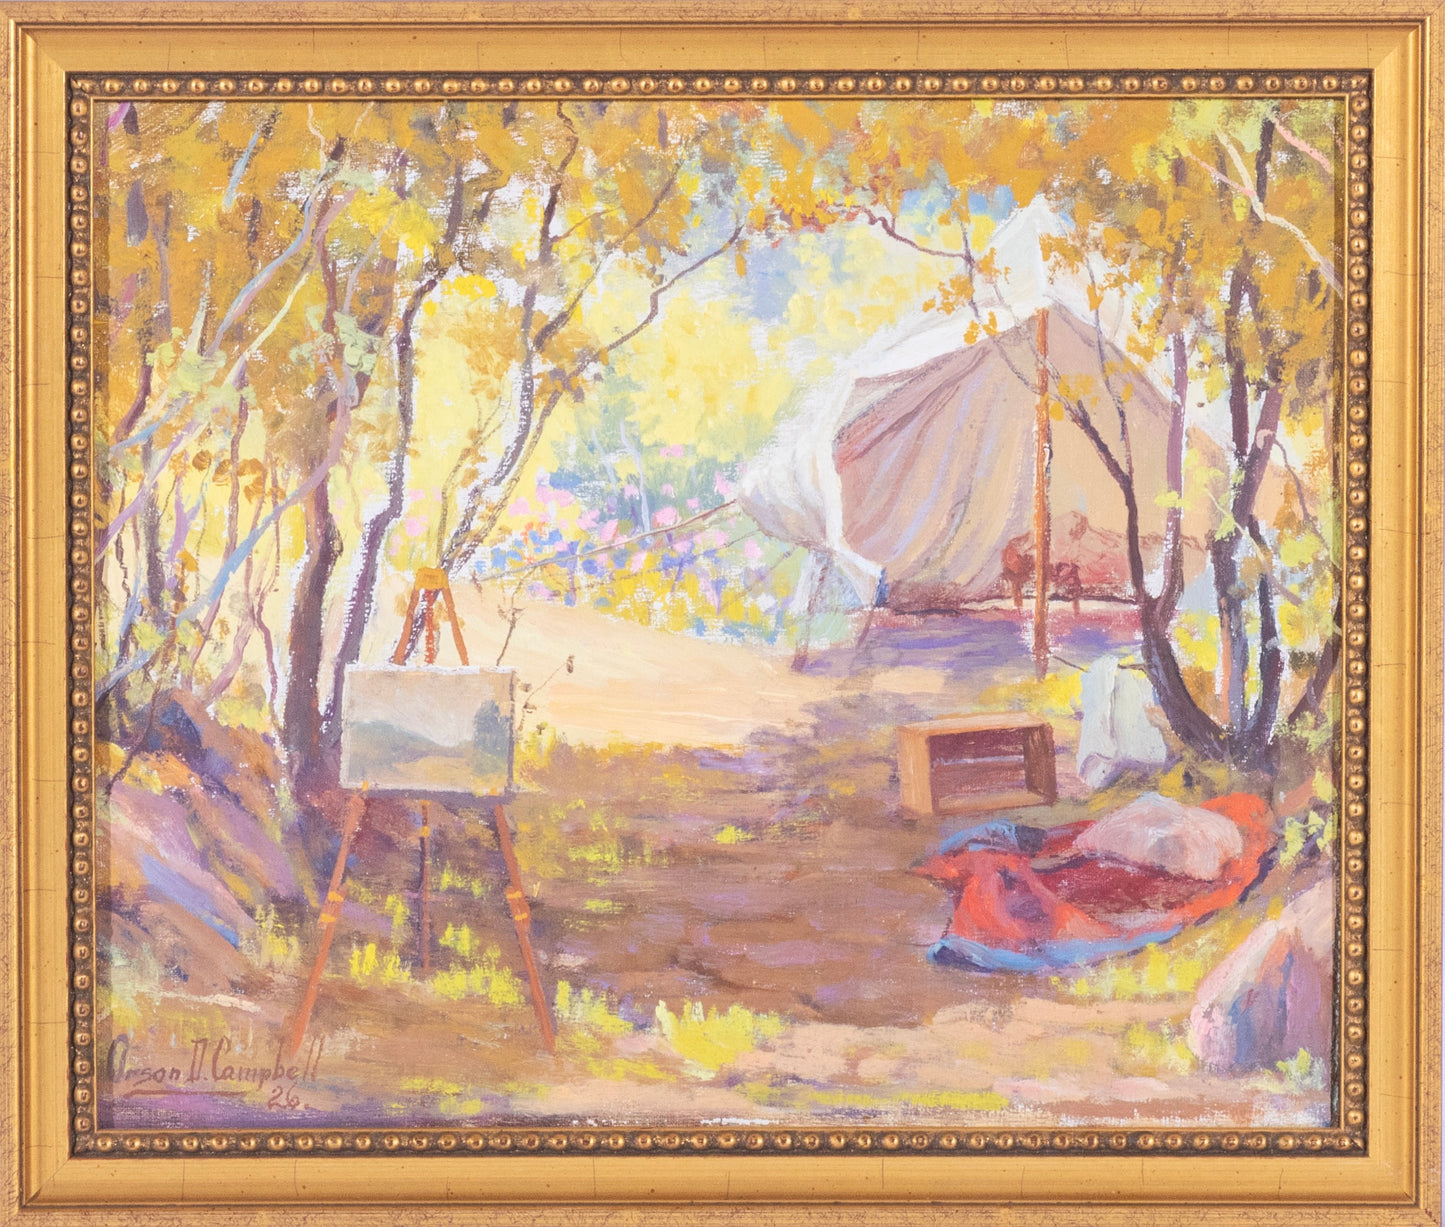 Orson D. Campbell - Untitled (Camp Scene with Easel) 1926 10.5" x 12.5"